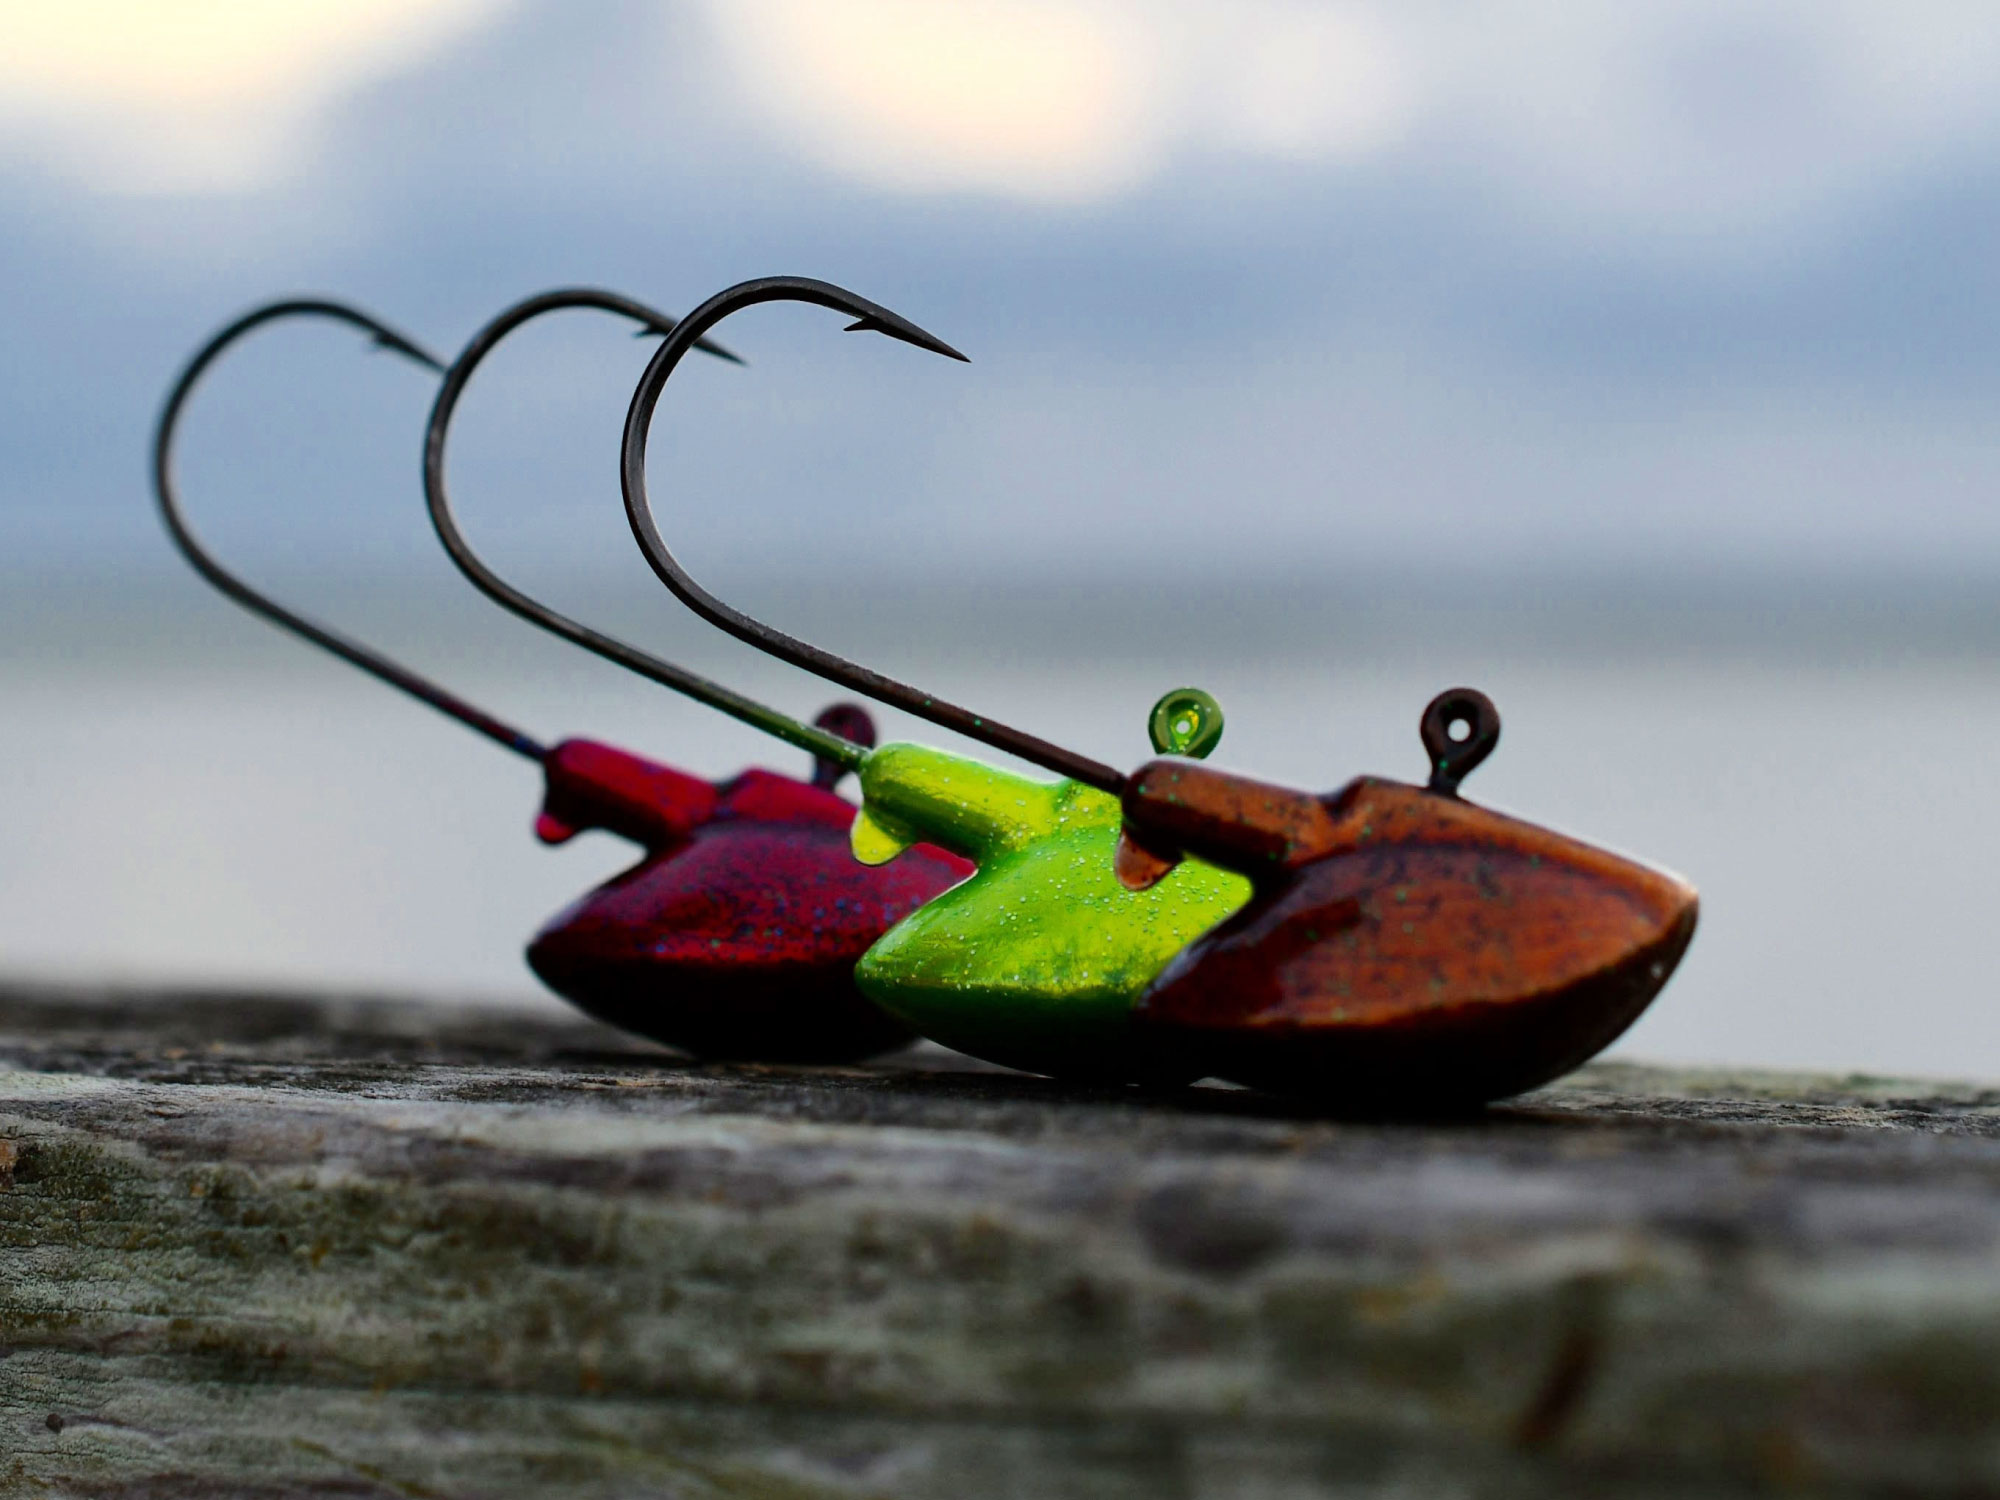 http://saltwaterammoco.com/wp-content/uploads/2019/12/fishing-lures-for-sale.jpg